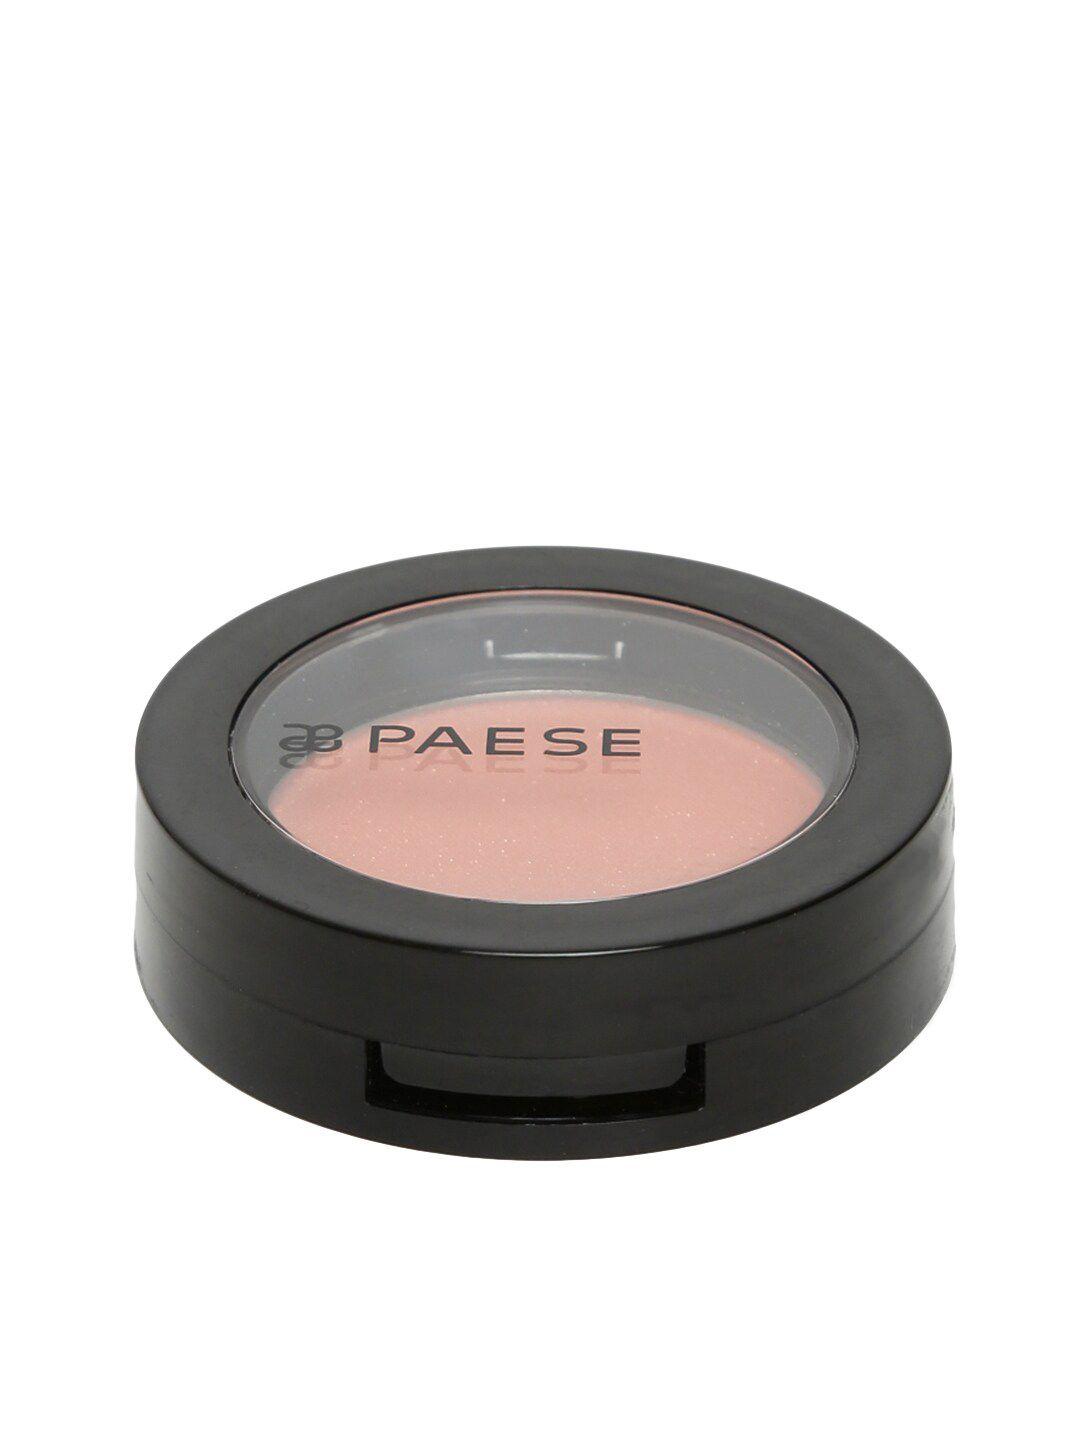 paese cosmetics blush with argan oil - 54